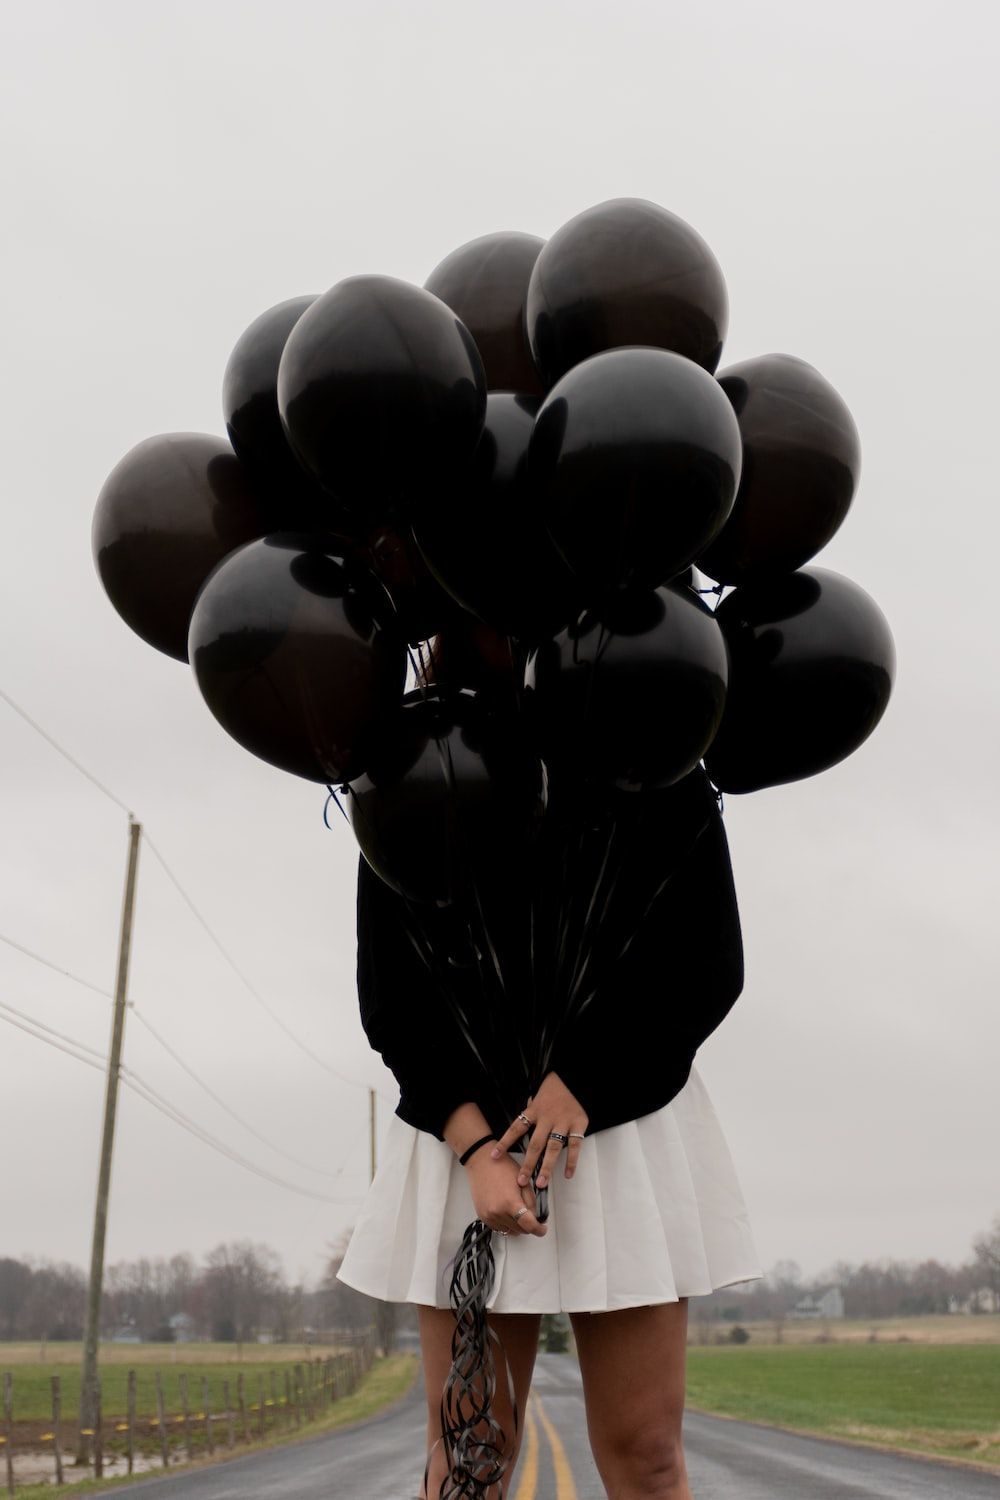 Black balloons on mid air during daytime photo